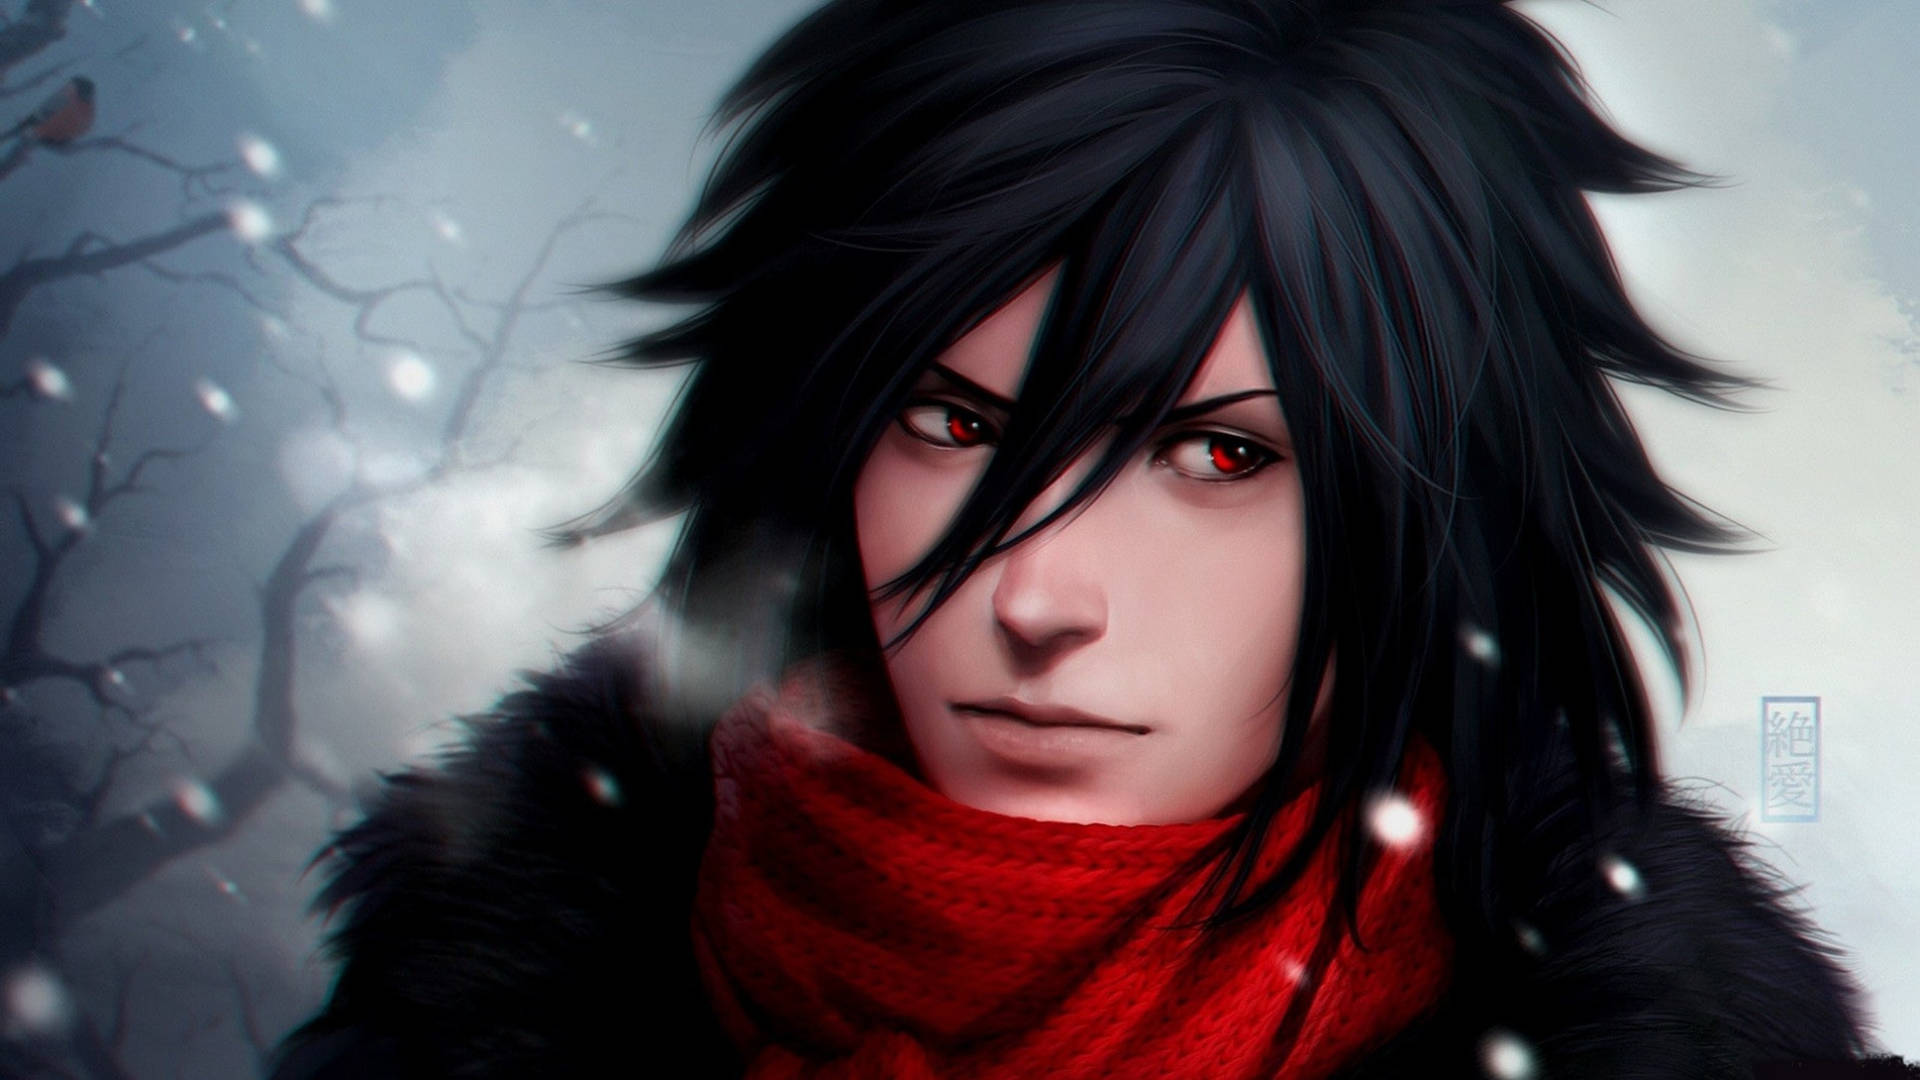 The Madara 'Winter' Fan Art Captures the Beauty of the Snowy Landscapes Wallpaper